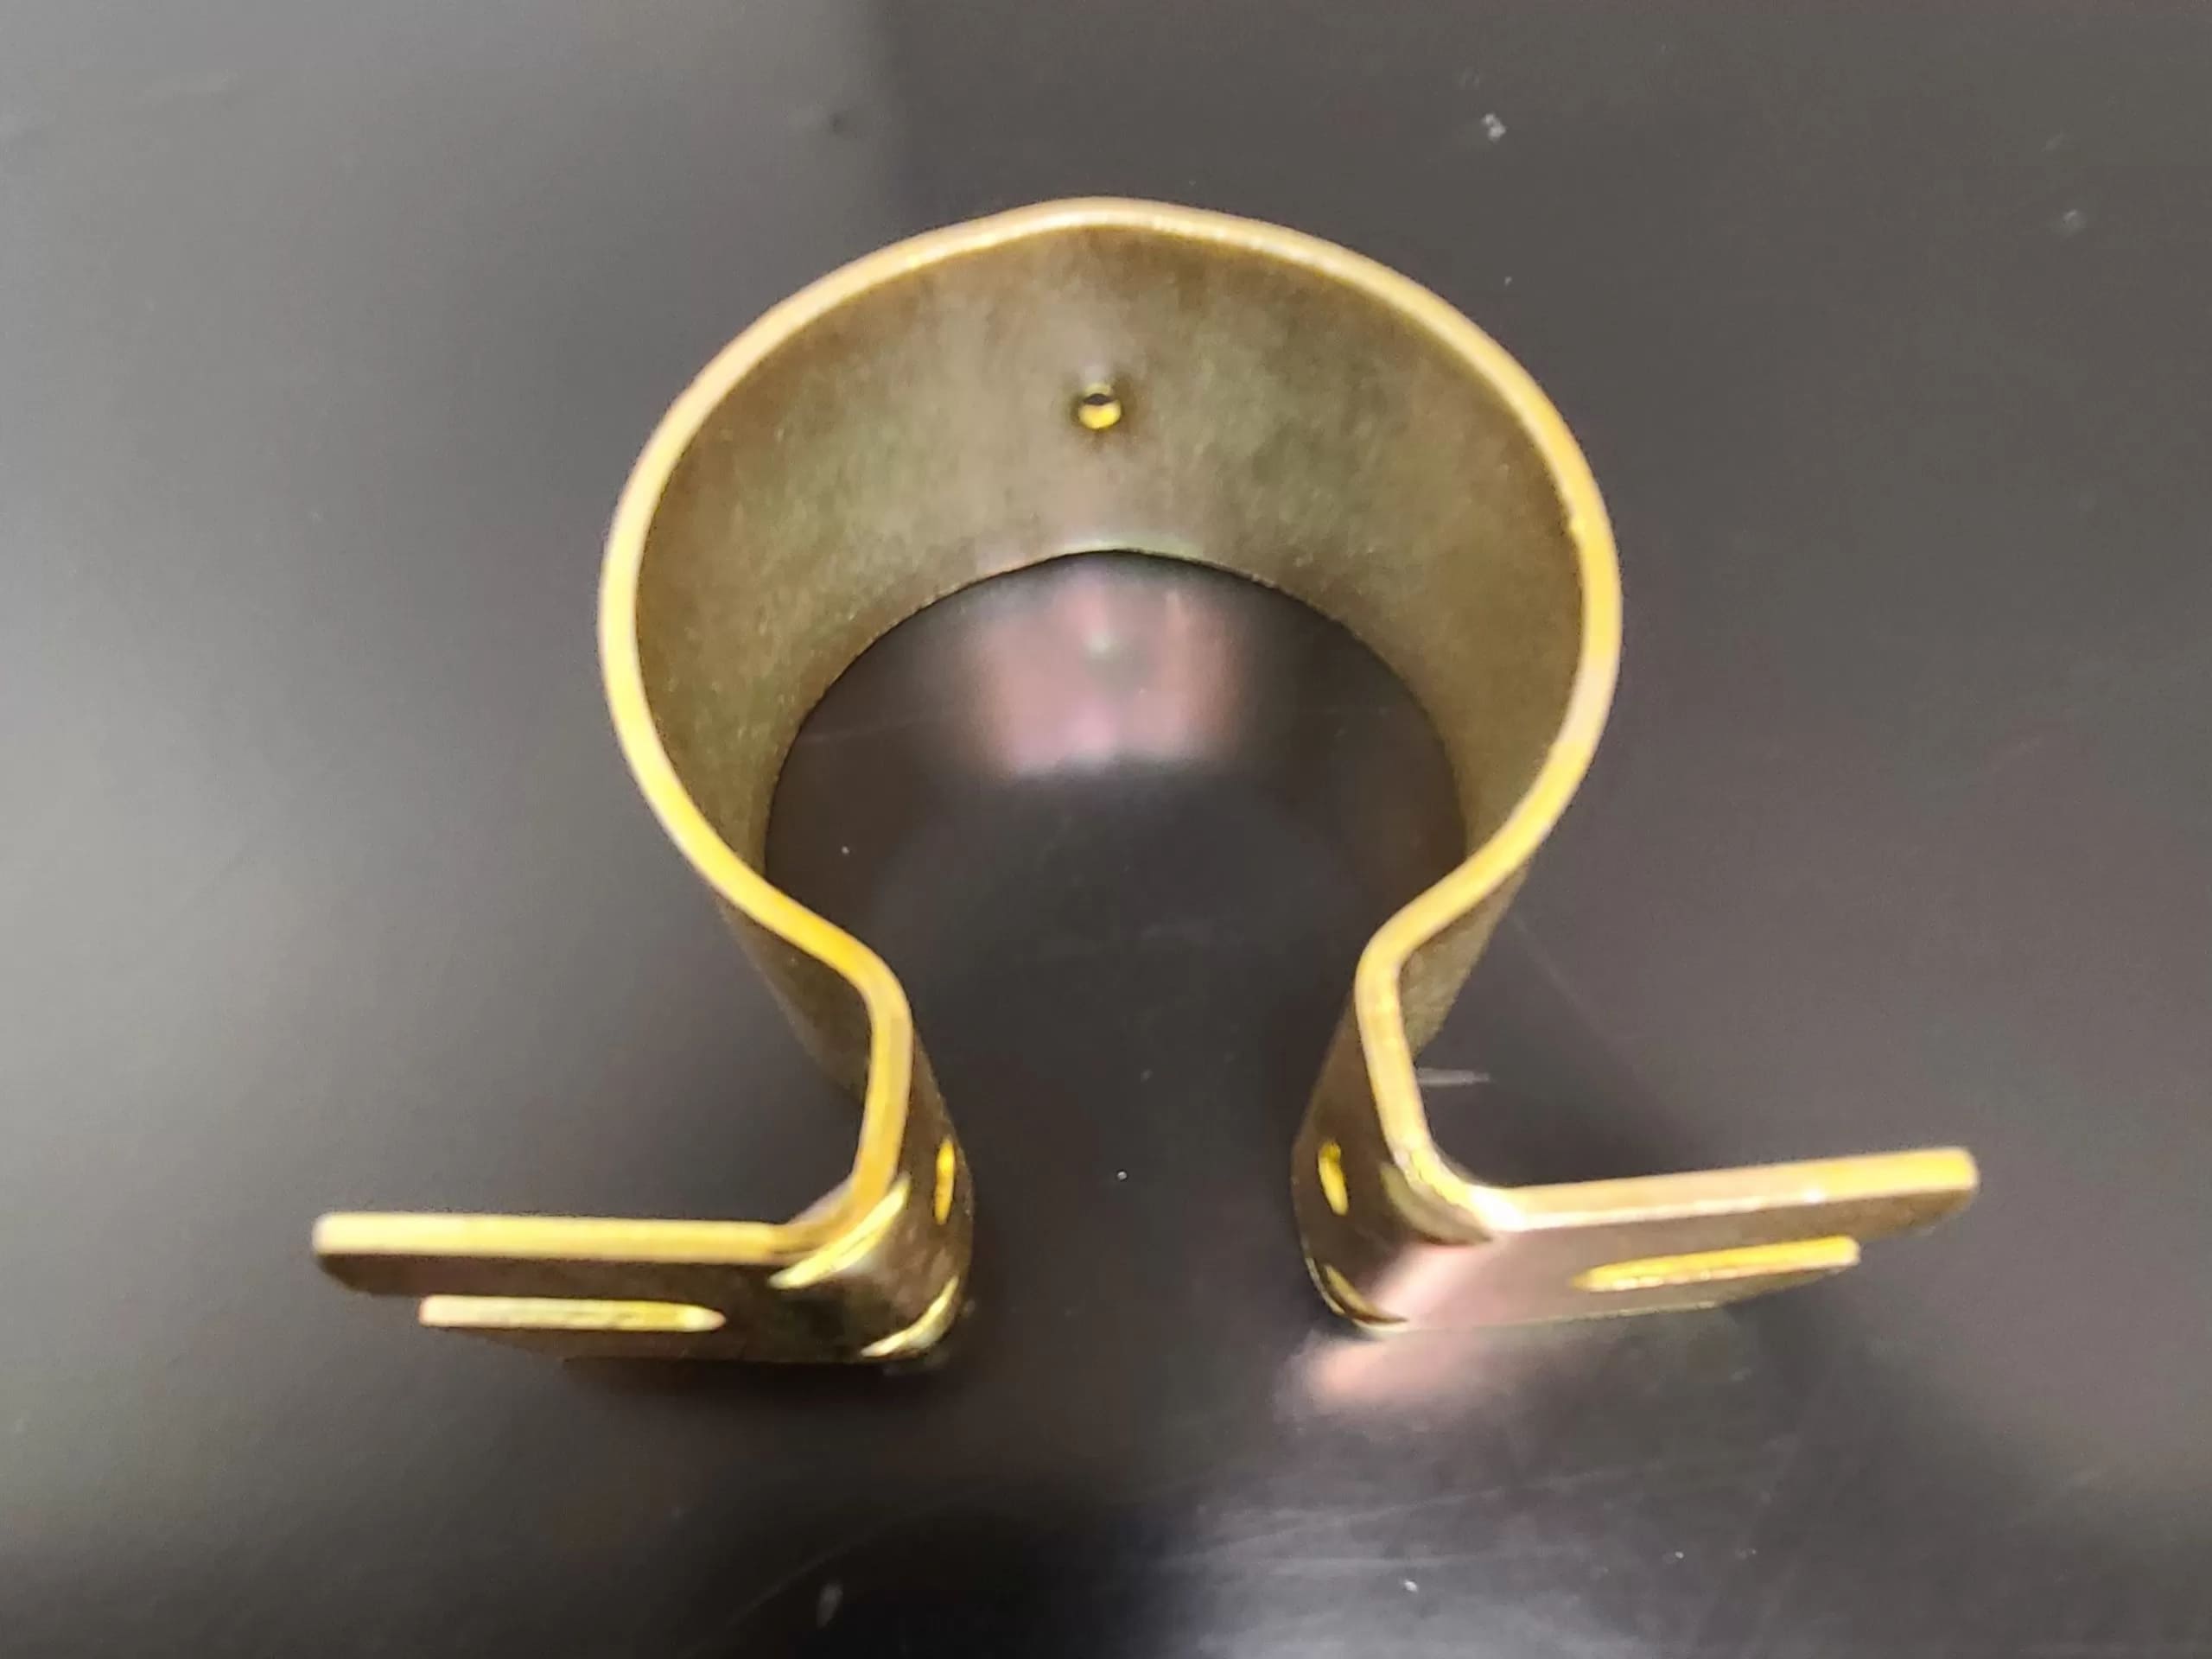 metal part in brass finish